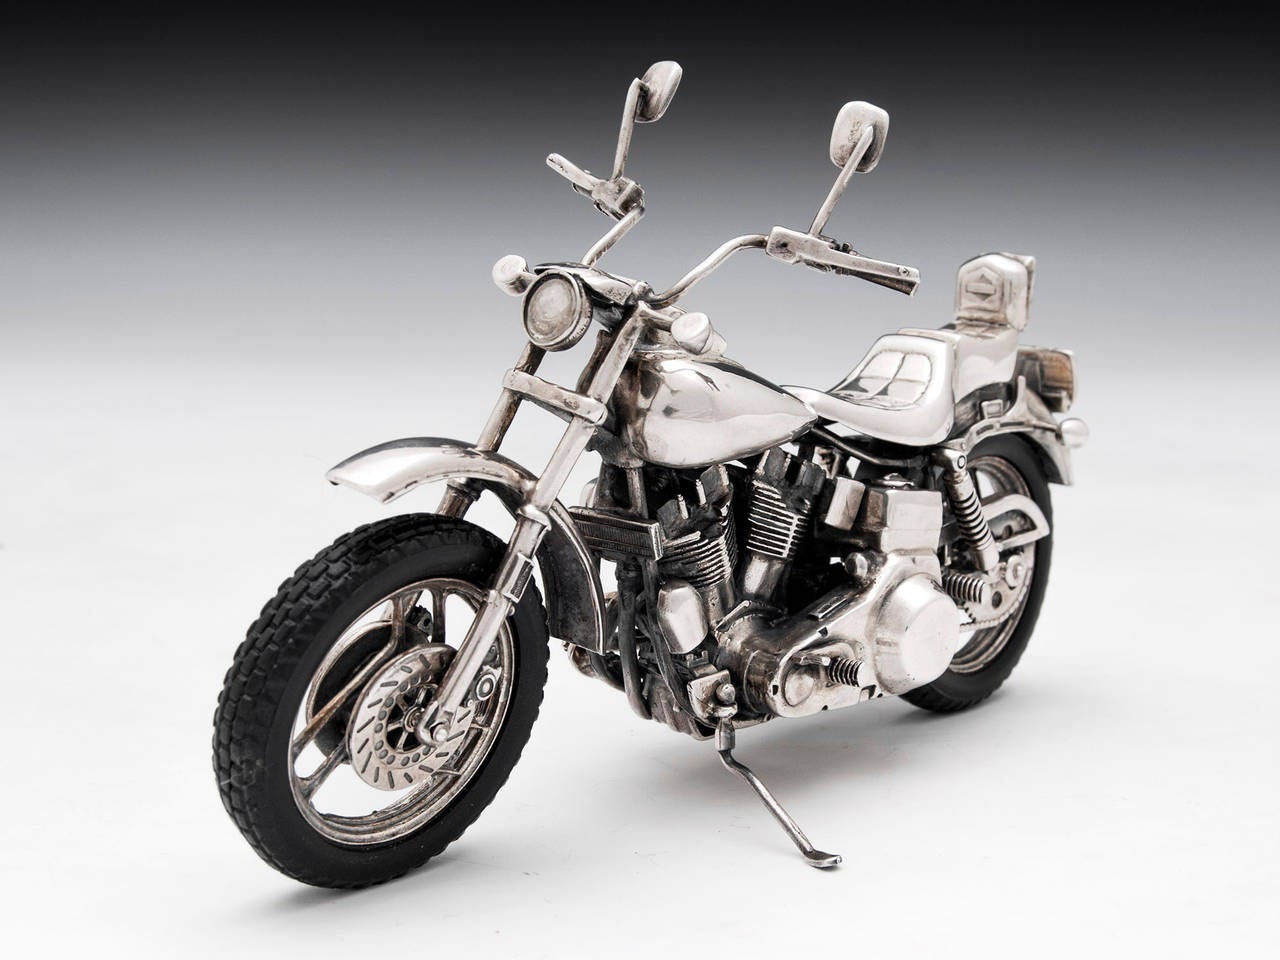 Harley Davidson FXE motorcycle of the 1970s made of sterling silver in Arezzo, Italy.

The entire very rare Harley Davidson motorbike is made of sterling silver with exquisite attention to detail, rubber wheels and features moving handlebars,